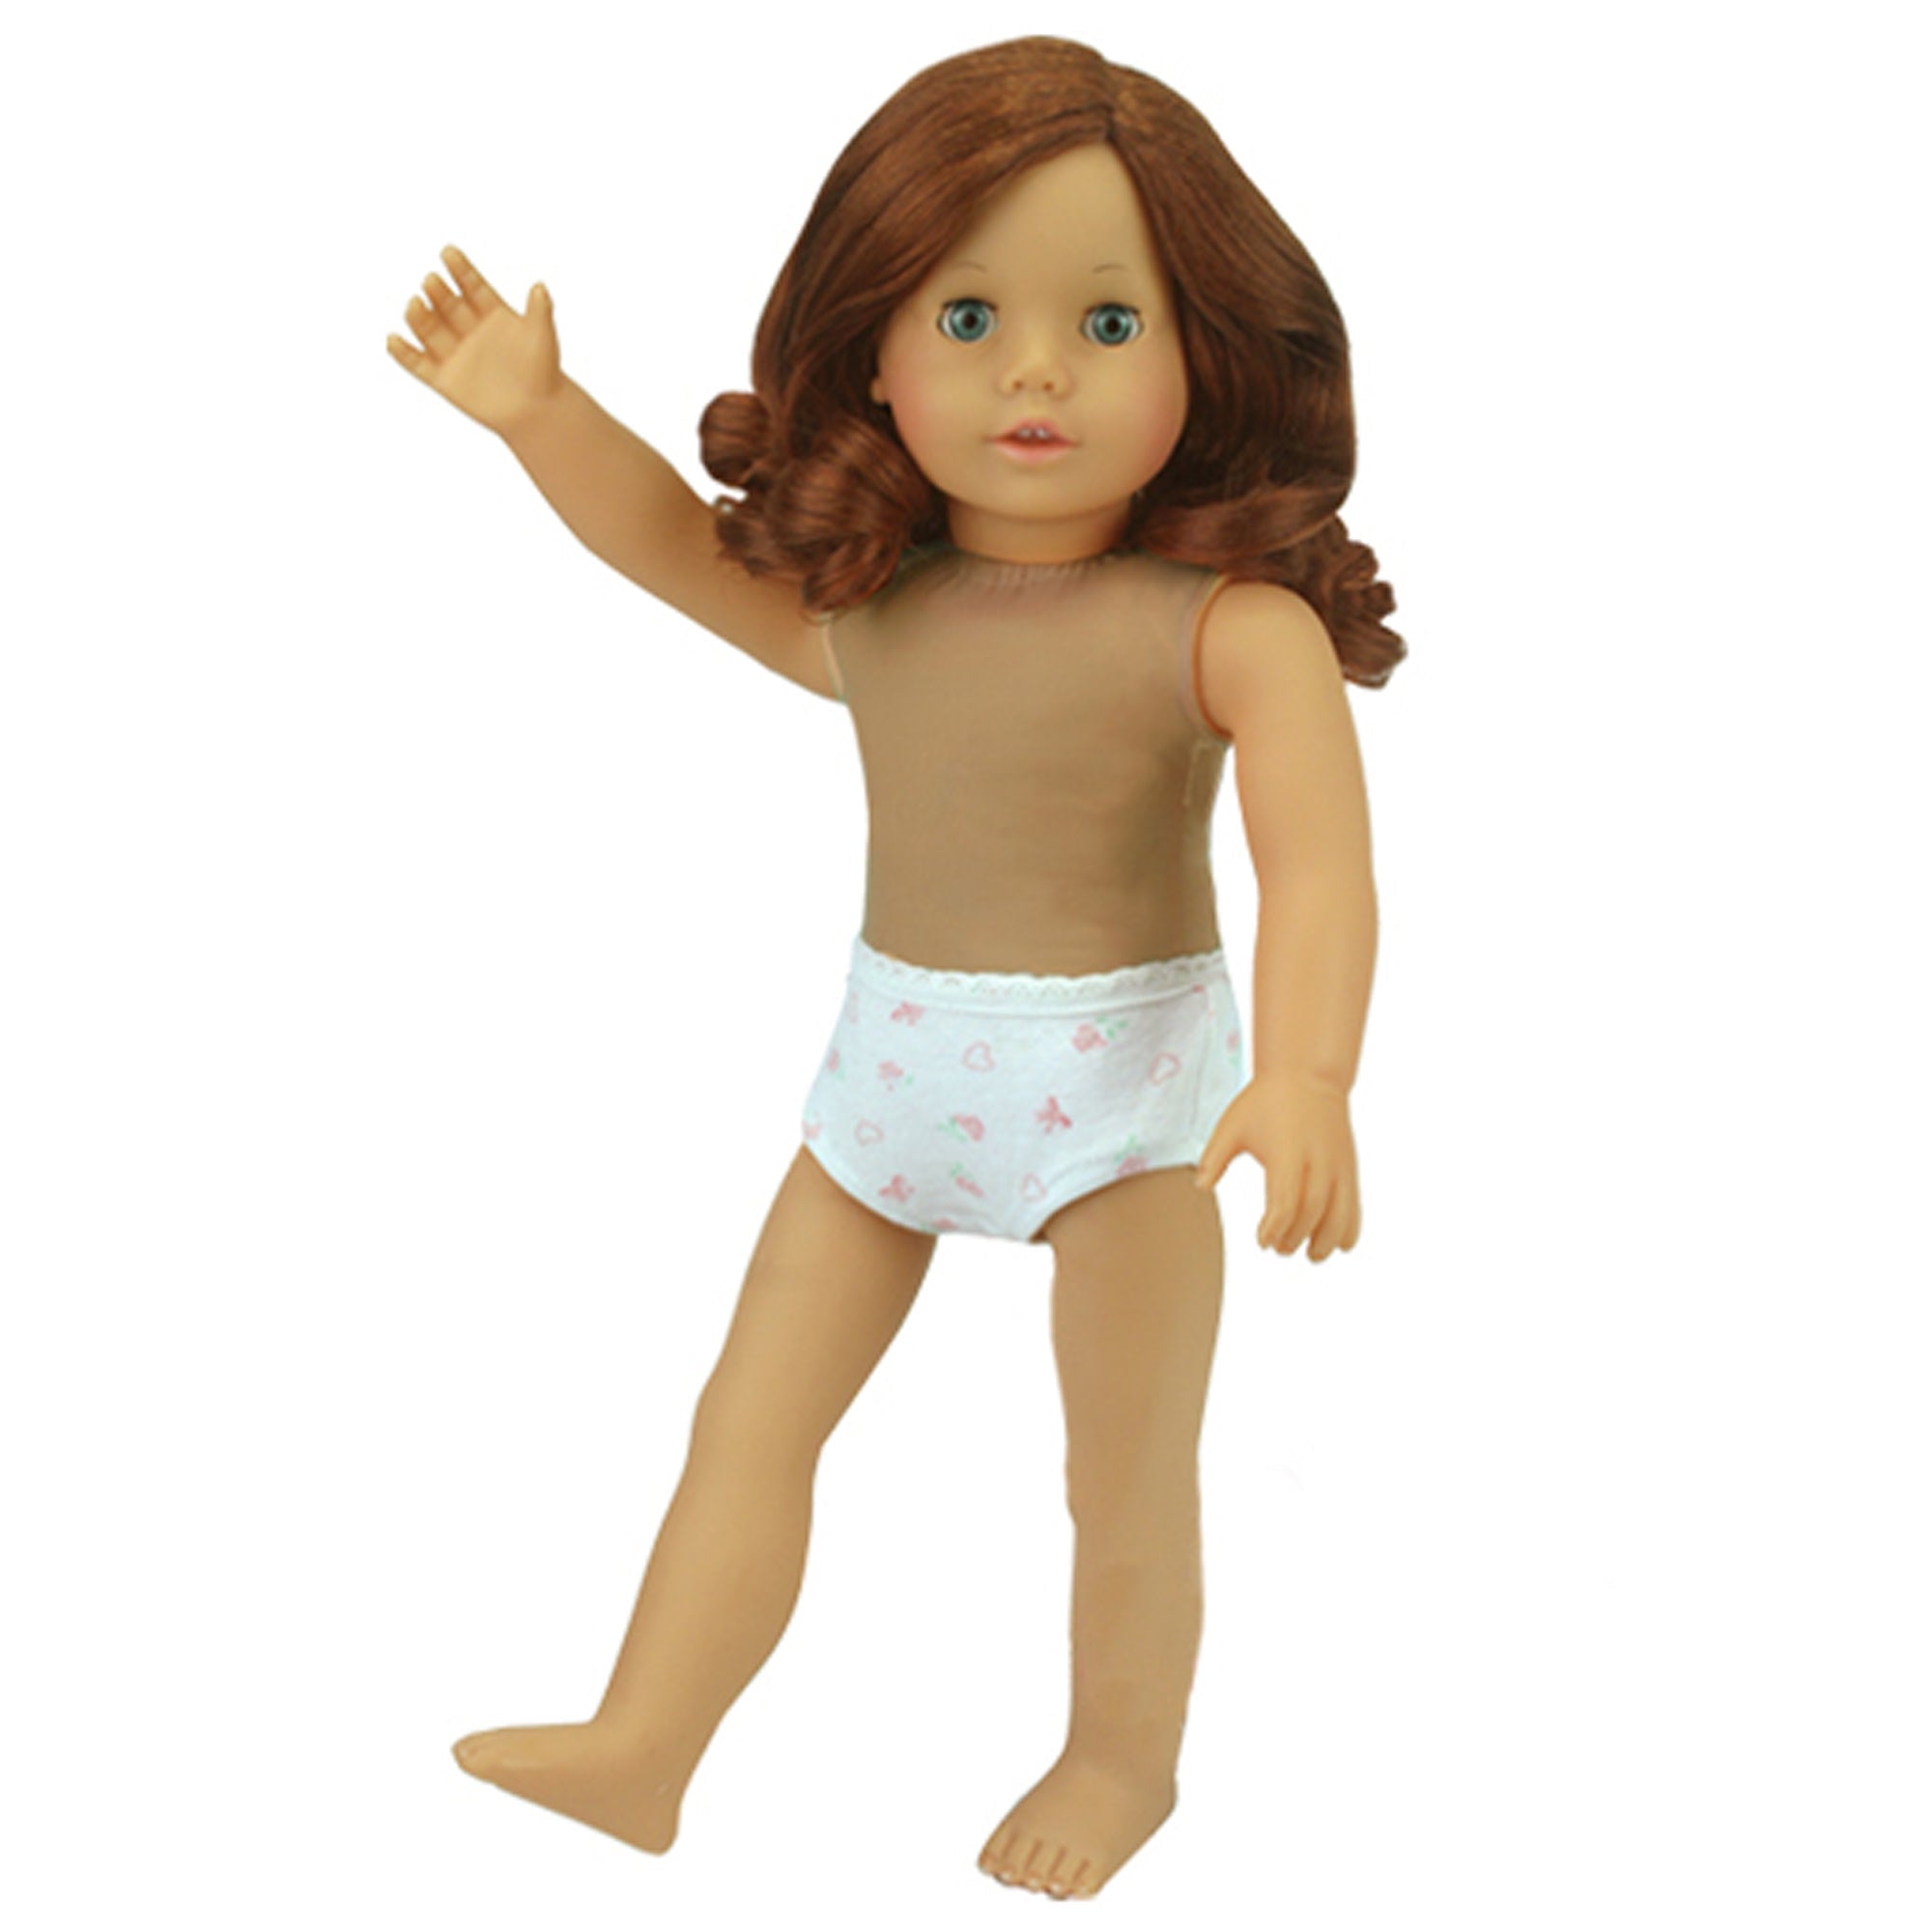 Sophia's Undressed Posable 18'' Soft Bodied Vinyl Doll "Carly" with Auburn Hair, Blue Eyes, Light Skin Tone